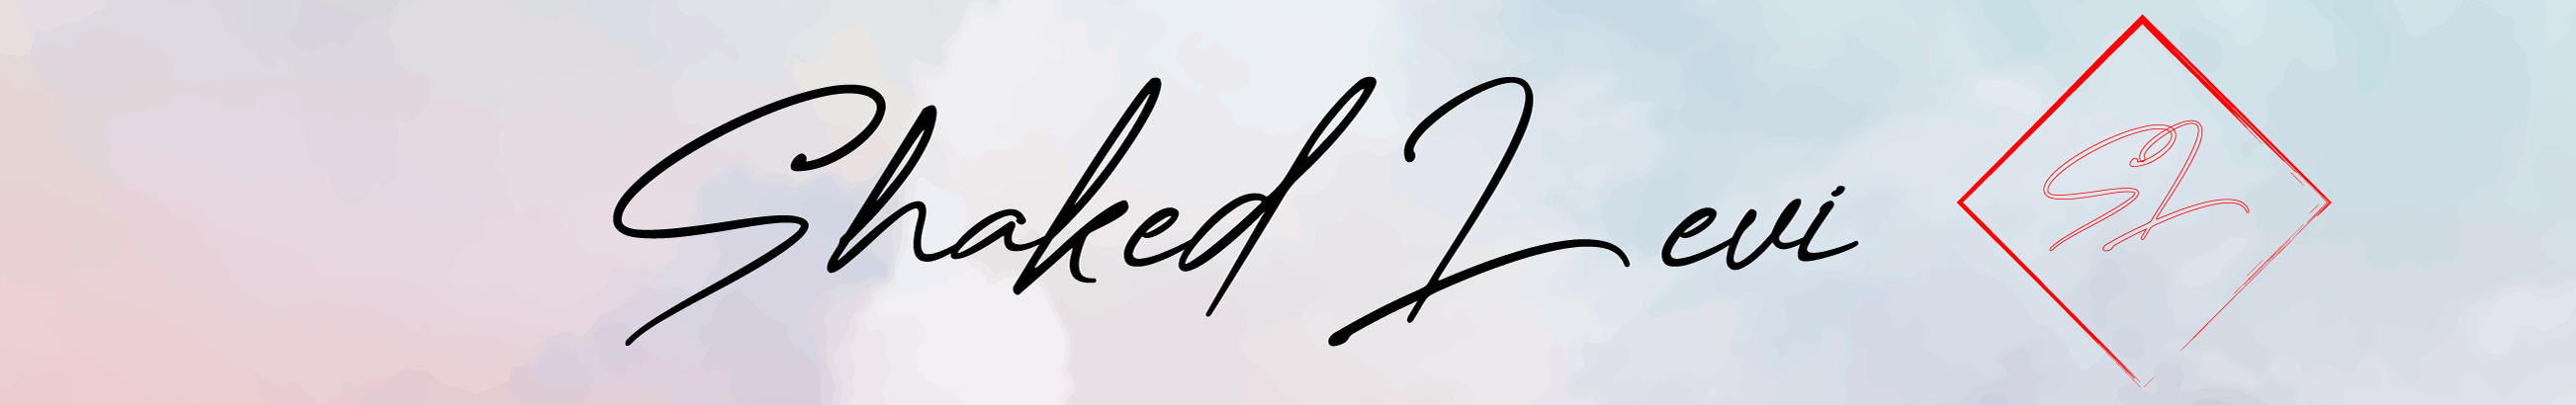 Shaked Levi's profile banner